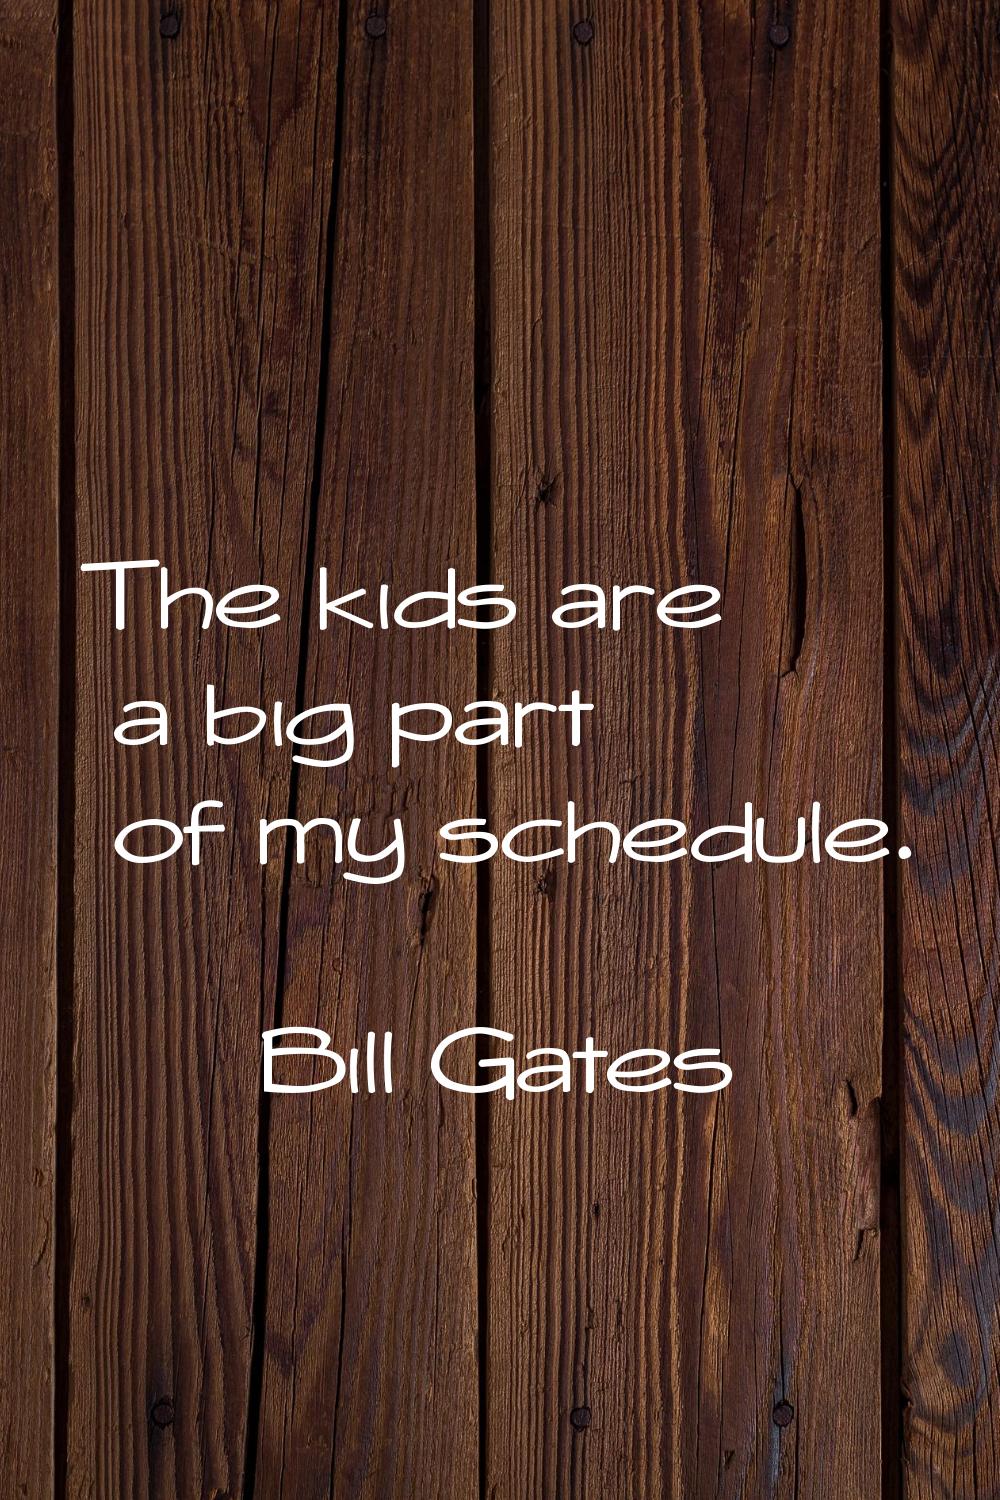 The kids are a big part of my schedule.